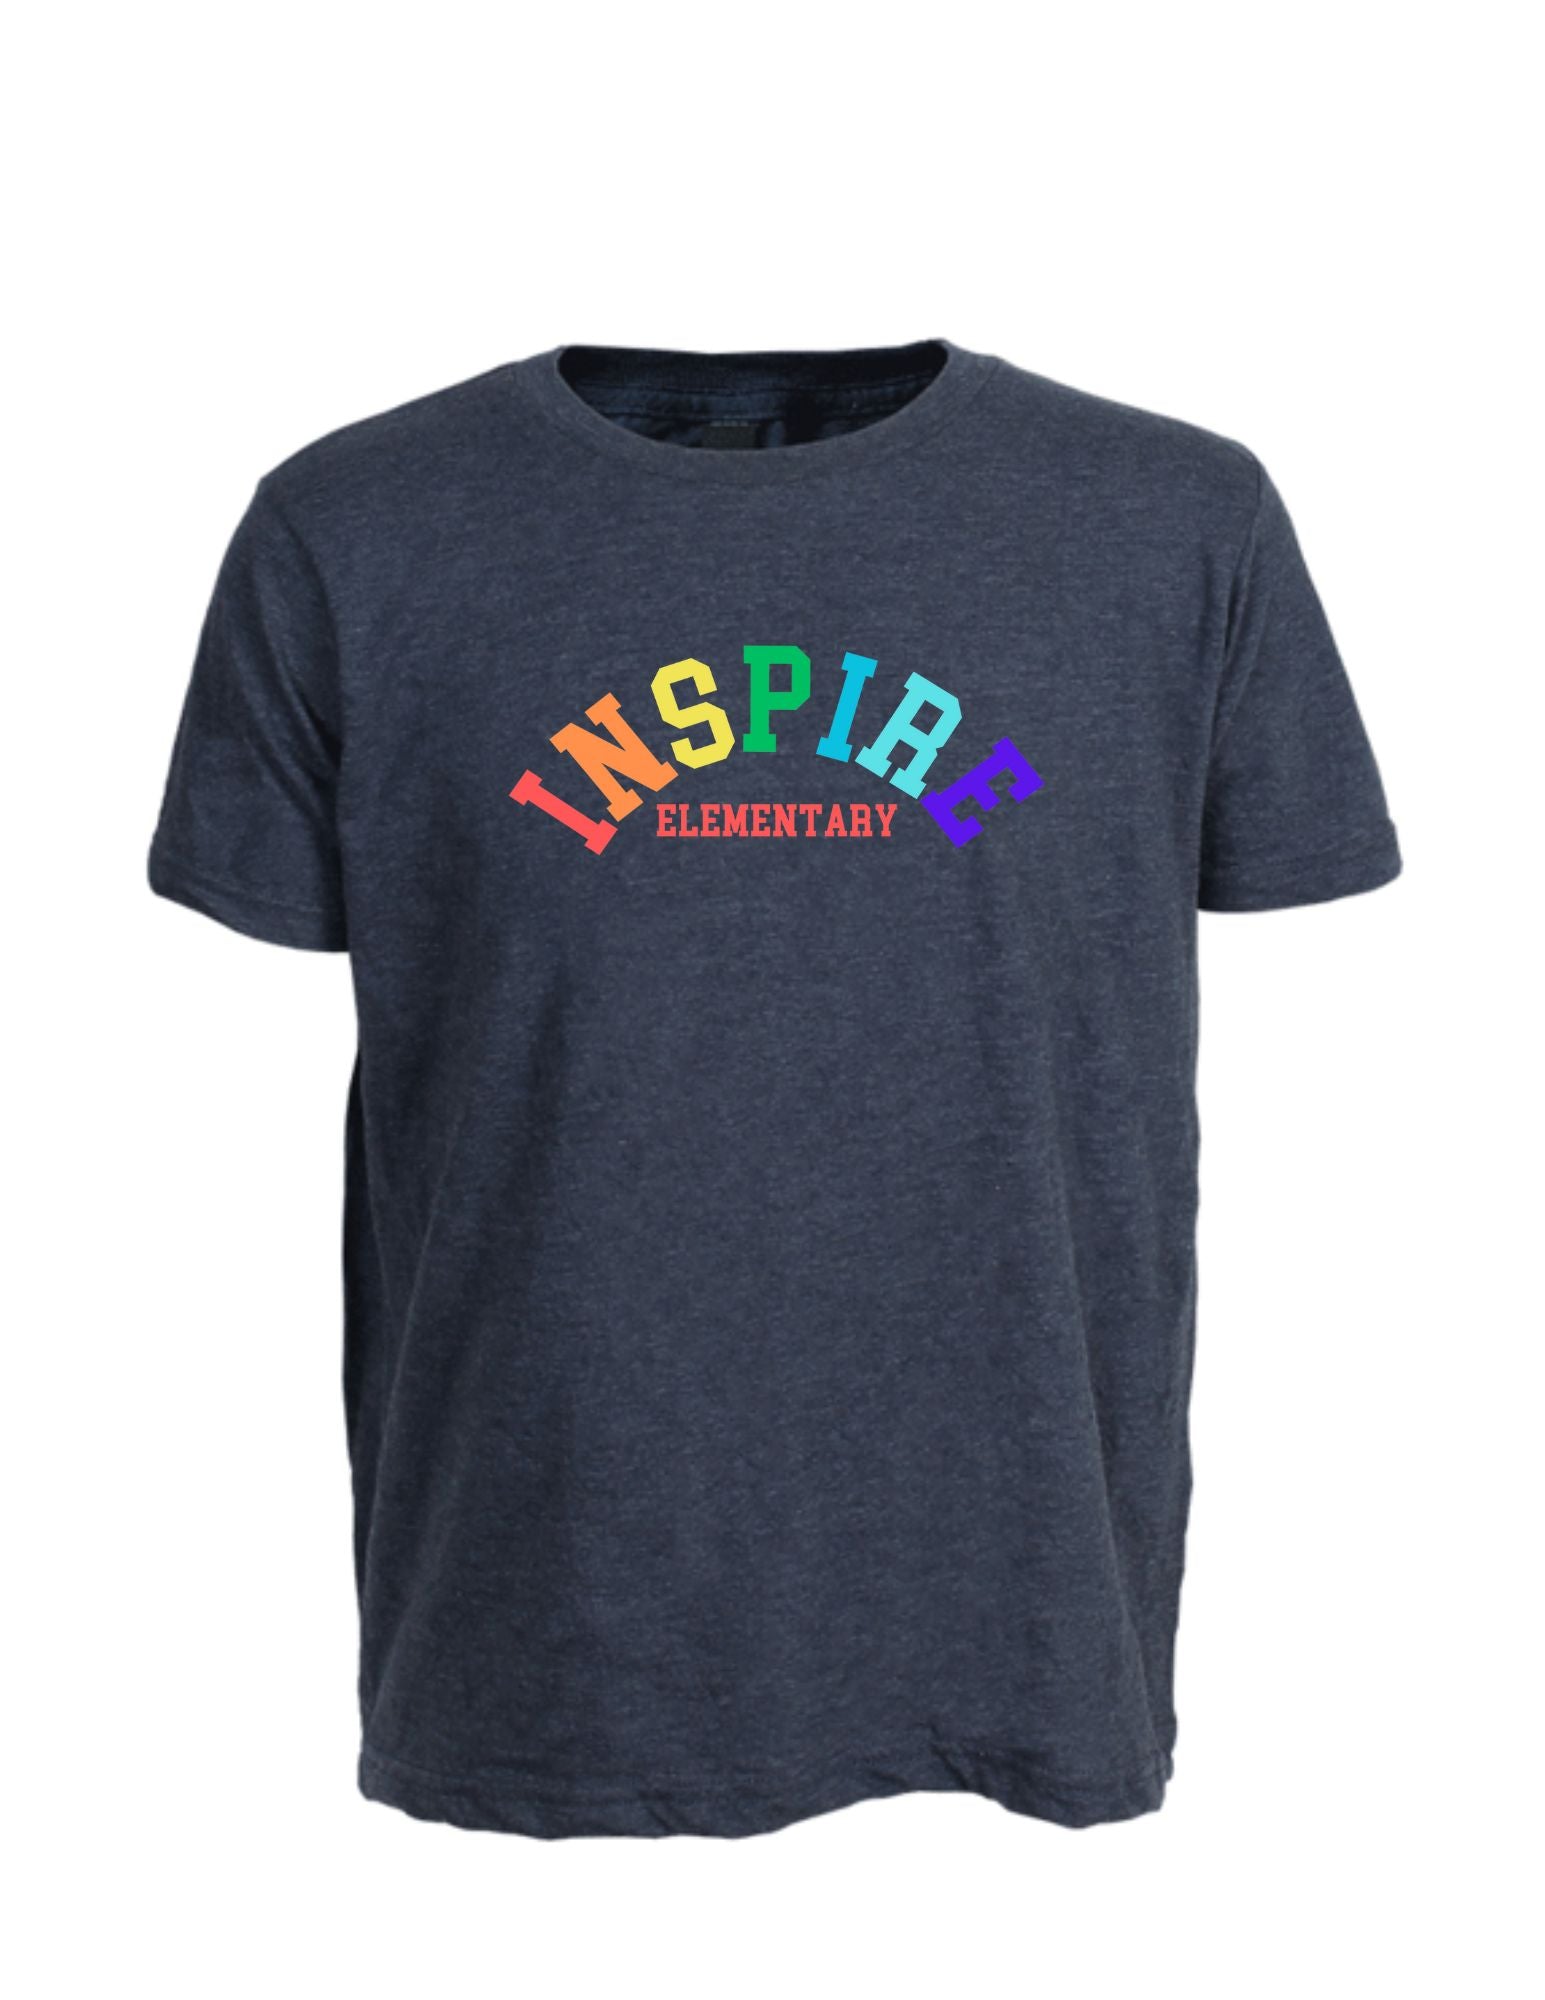 Inspire Colorful Tee | Heather Navy YOUTH only - Aspen Lane 